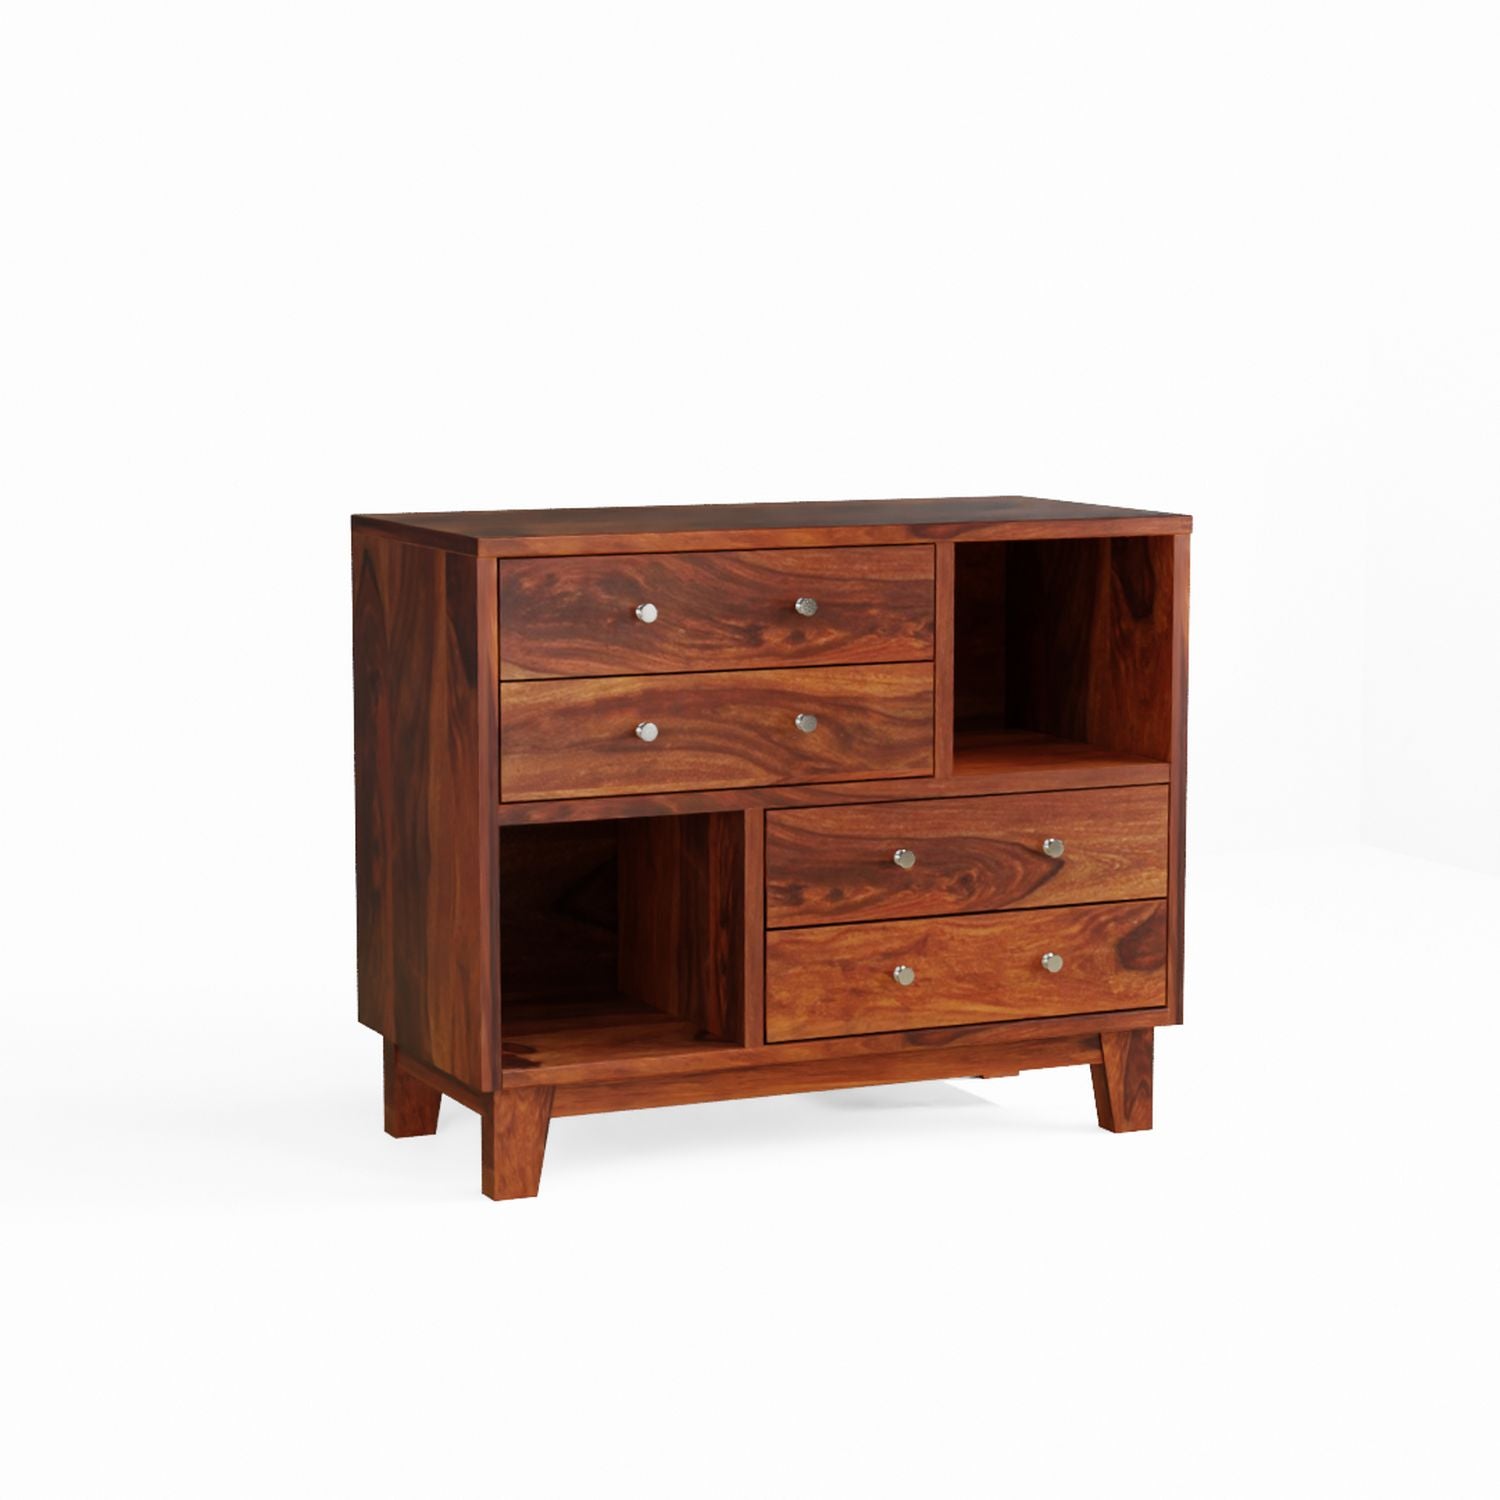 Befree Solid Sheesham Wood Chest of Drawers With Shelves (Natural Finish)